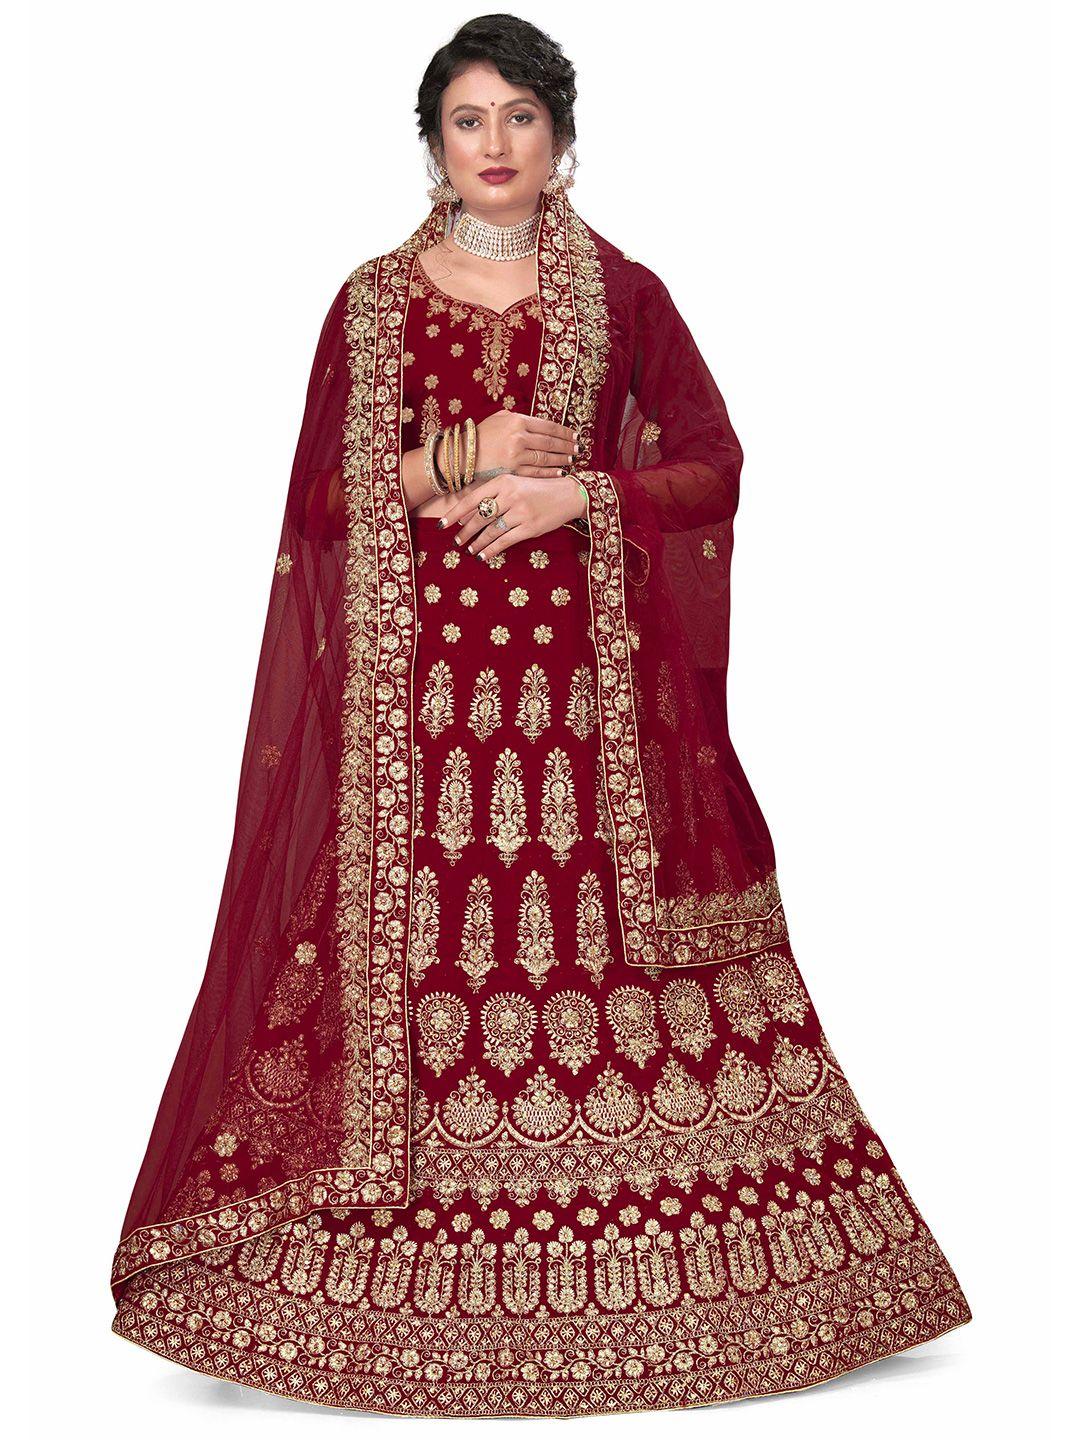 MANVAA Maroon & Gold-Toned Embroidered Beads and Stones Semi-Stitched Lehenga & Unstitched Blouse With